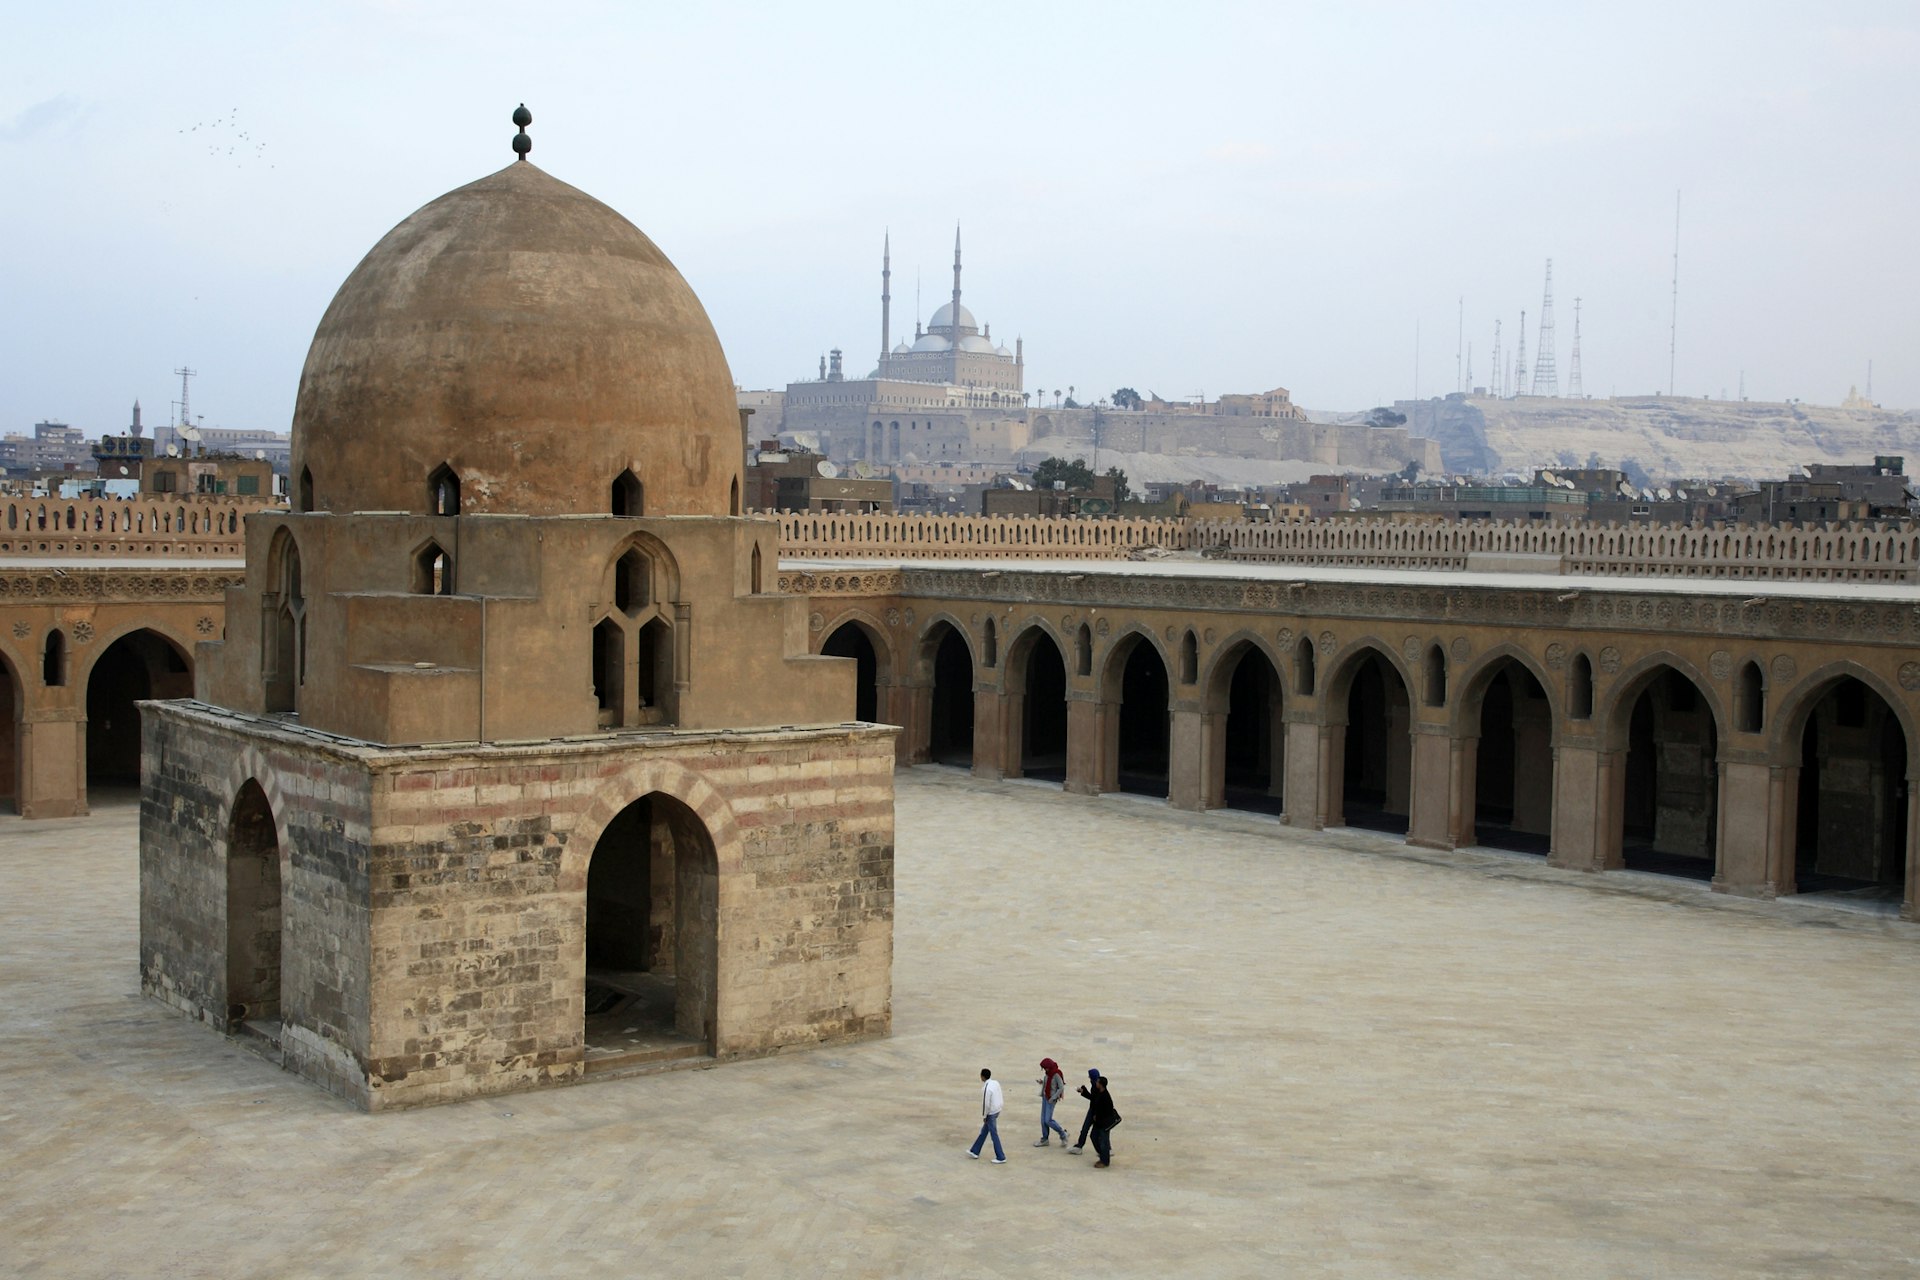 Four people walk through a courtyard with a large domed structure and arched cloisters